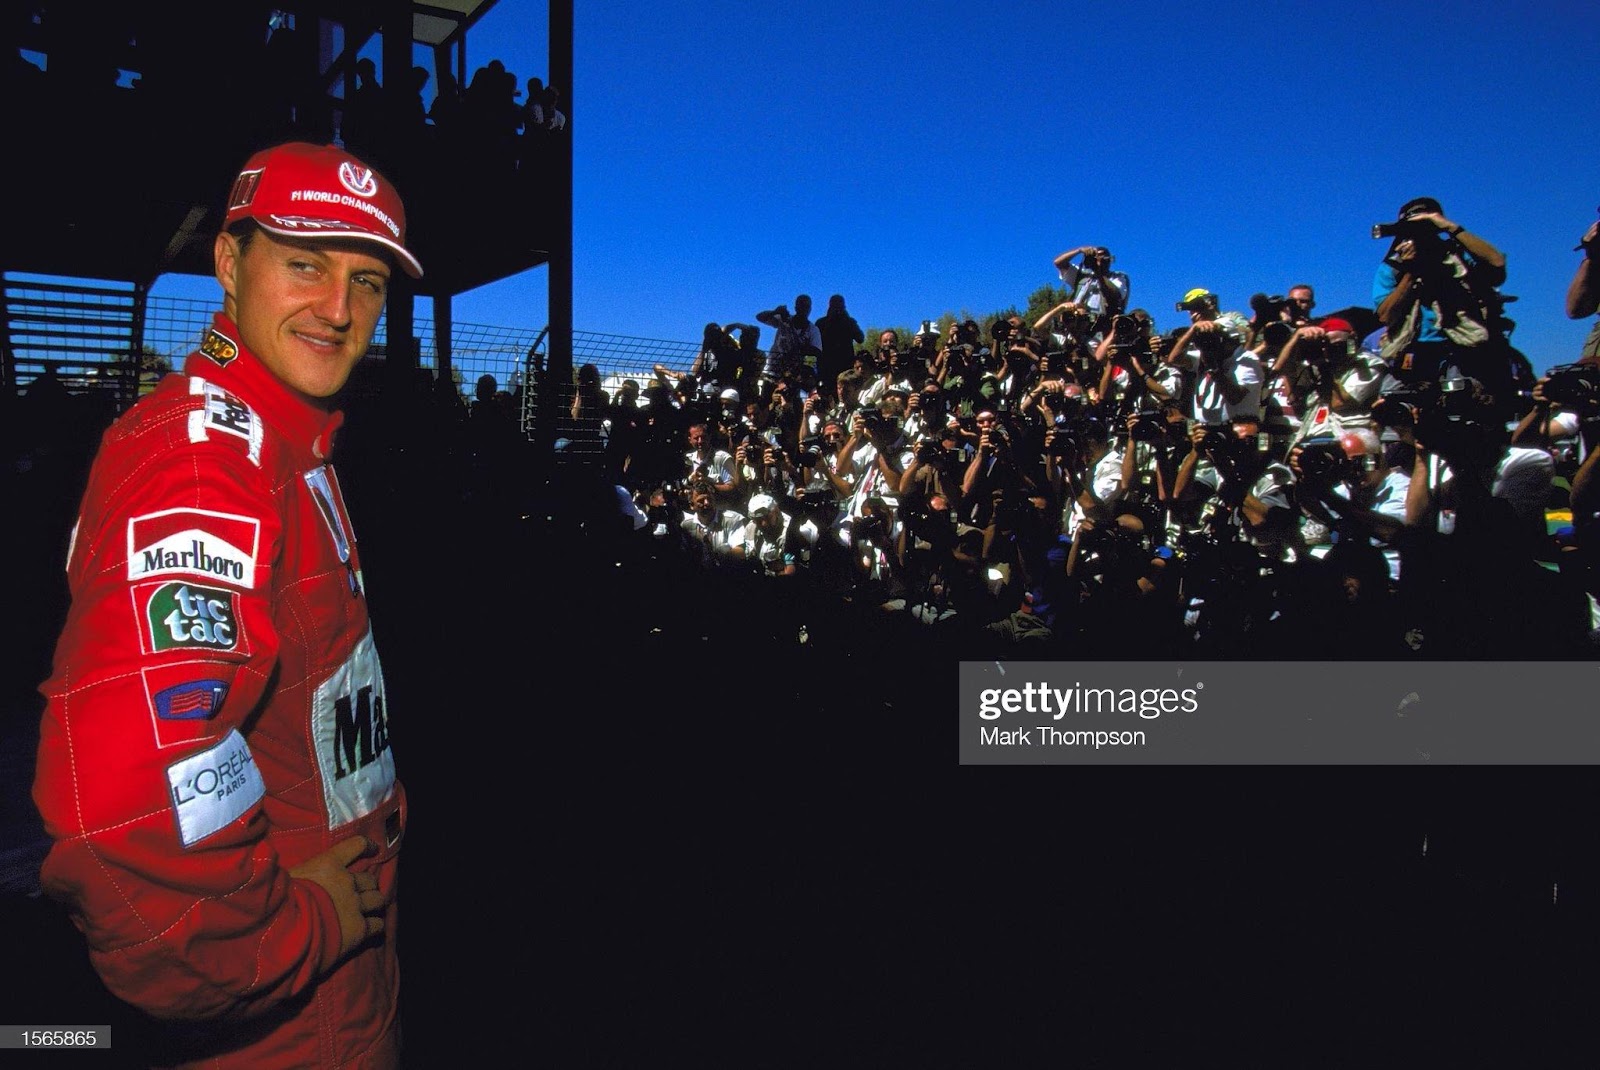 01 March 2001: Michael Schumacher, Ferrari, poses for photographers at the Albert Park Circuit in the lead up to the first Grand Prix of the 2001 season, Melbourne, Australia.